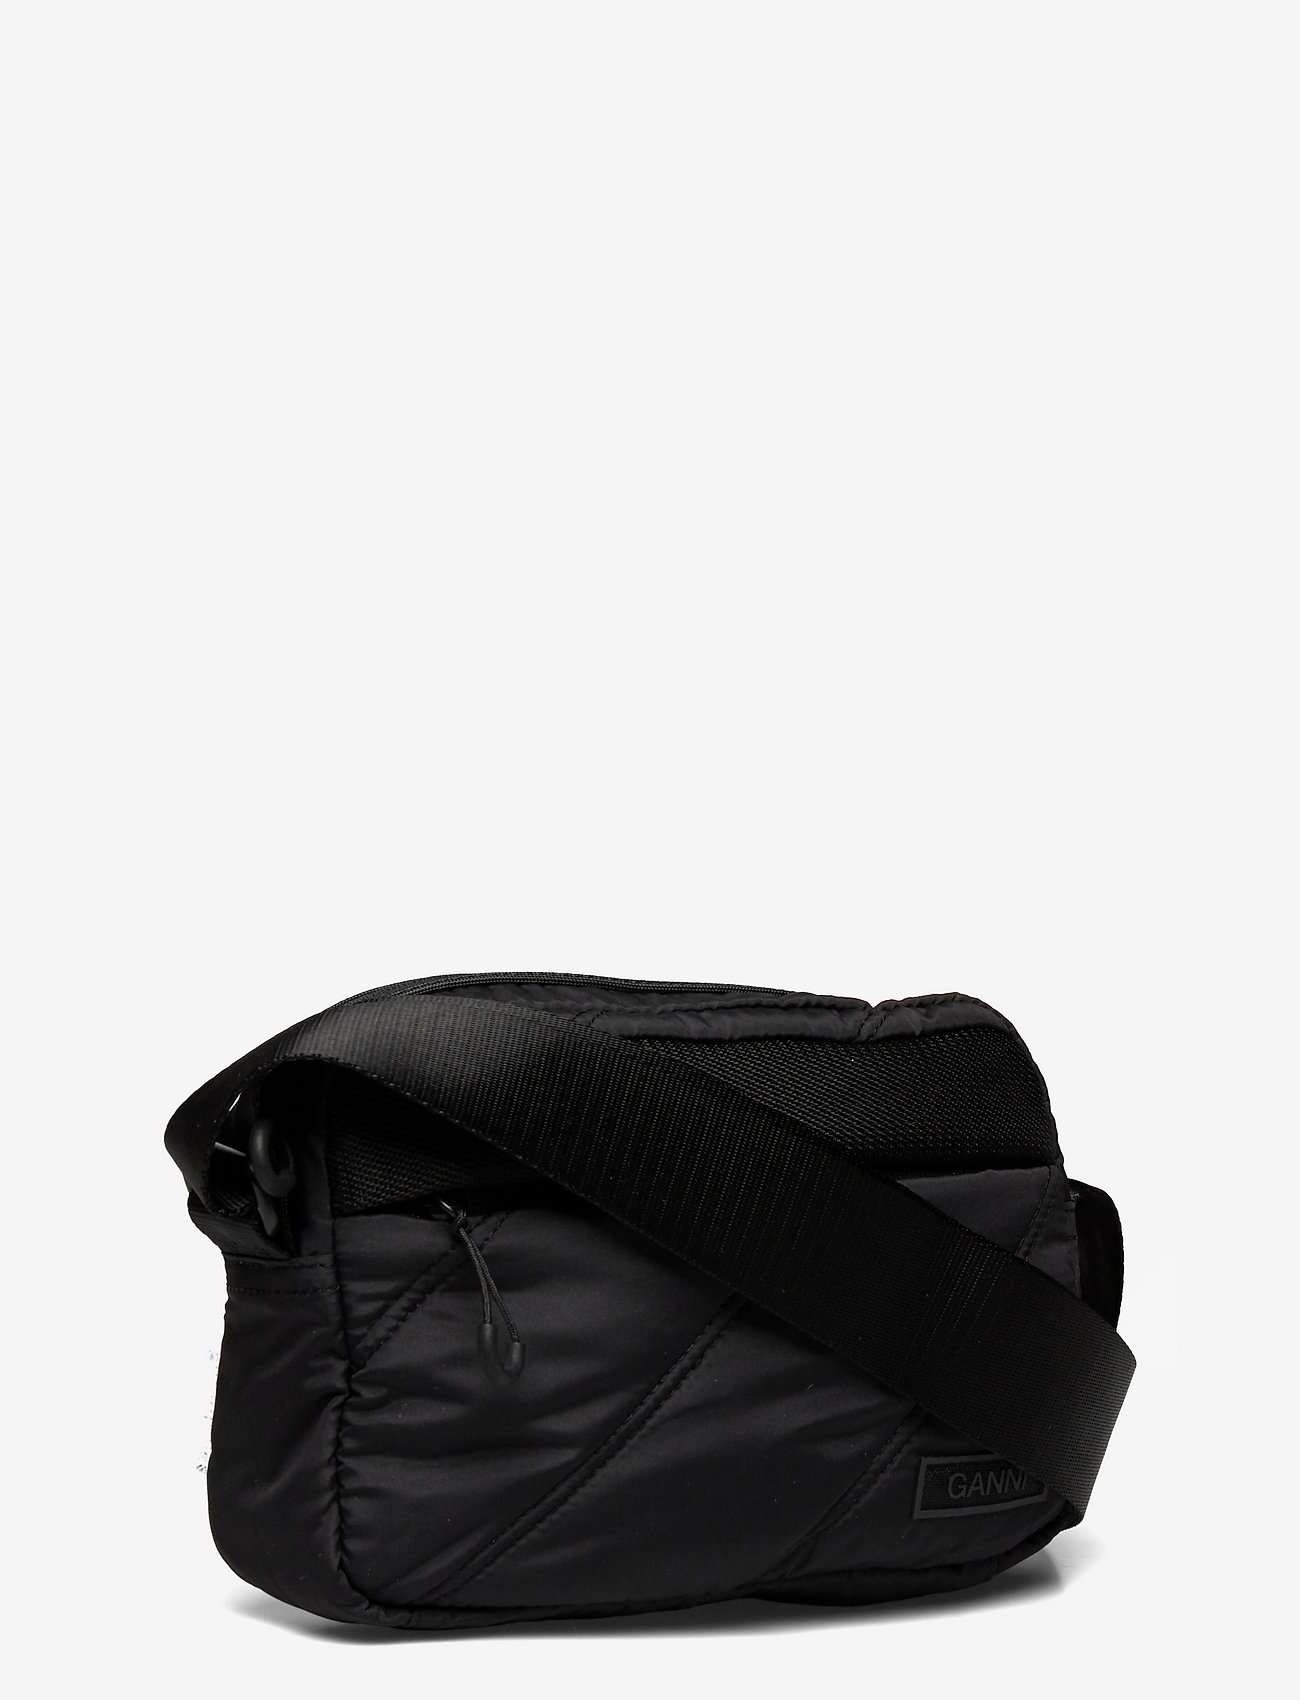 Ganni - Quilted Recycled Tech - black - 2